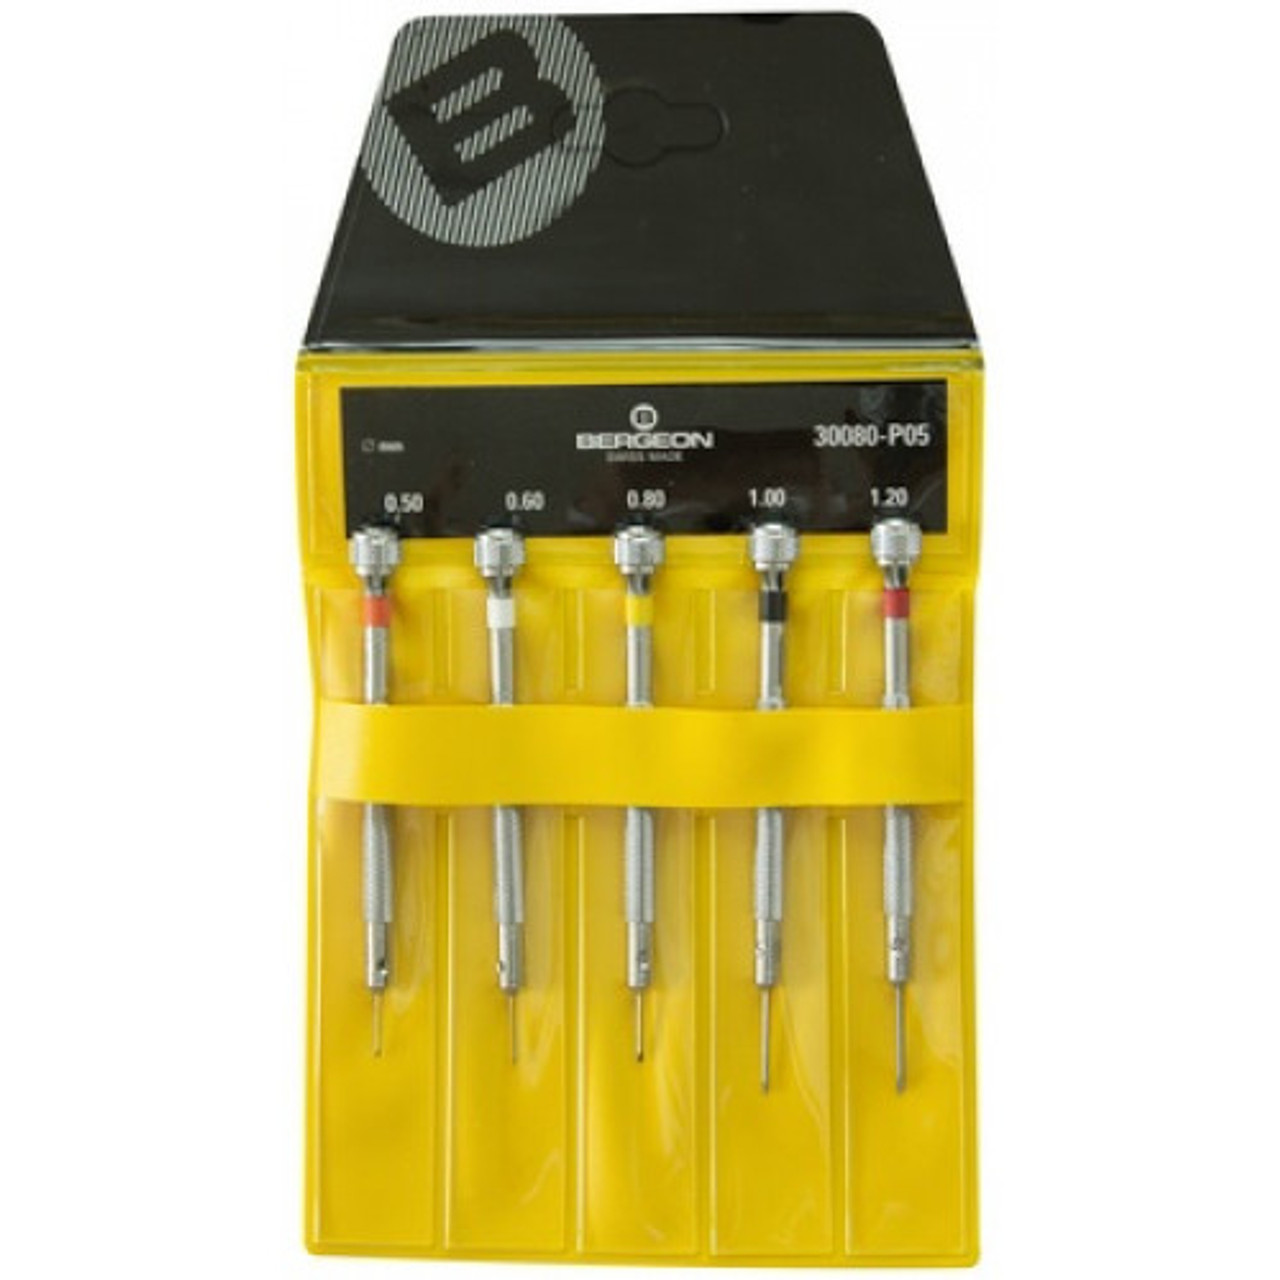 Bergeon® 30080-P05 Classic Screwdriver Set Steel 5 Pieces in Pouch